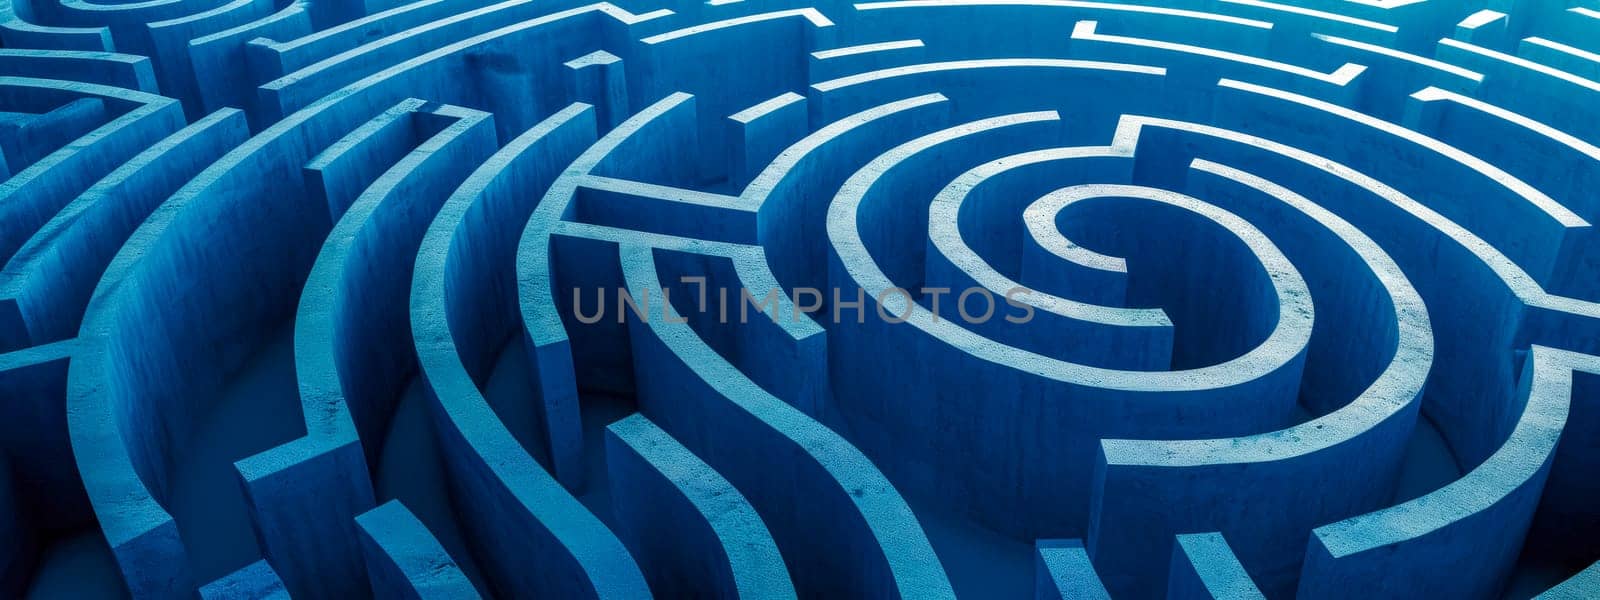 Overhead view of a complex circular maze in monochromatic blue tones. banner